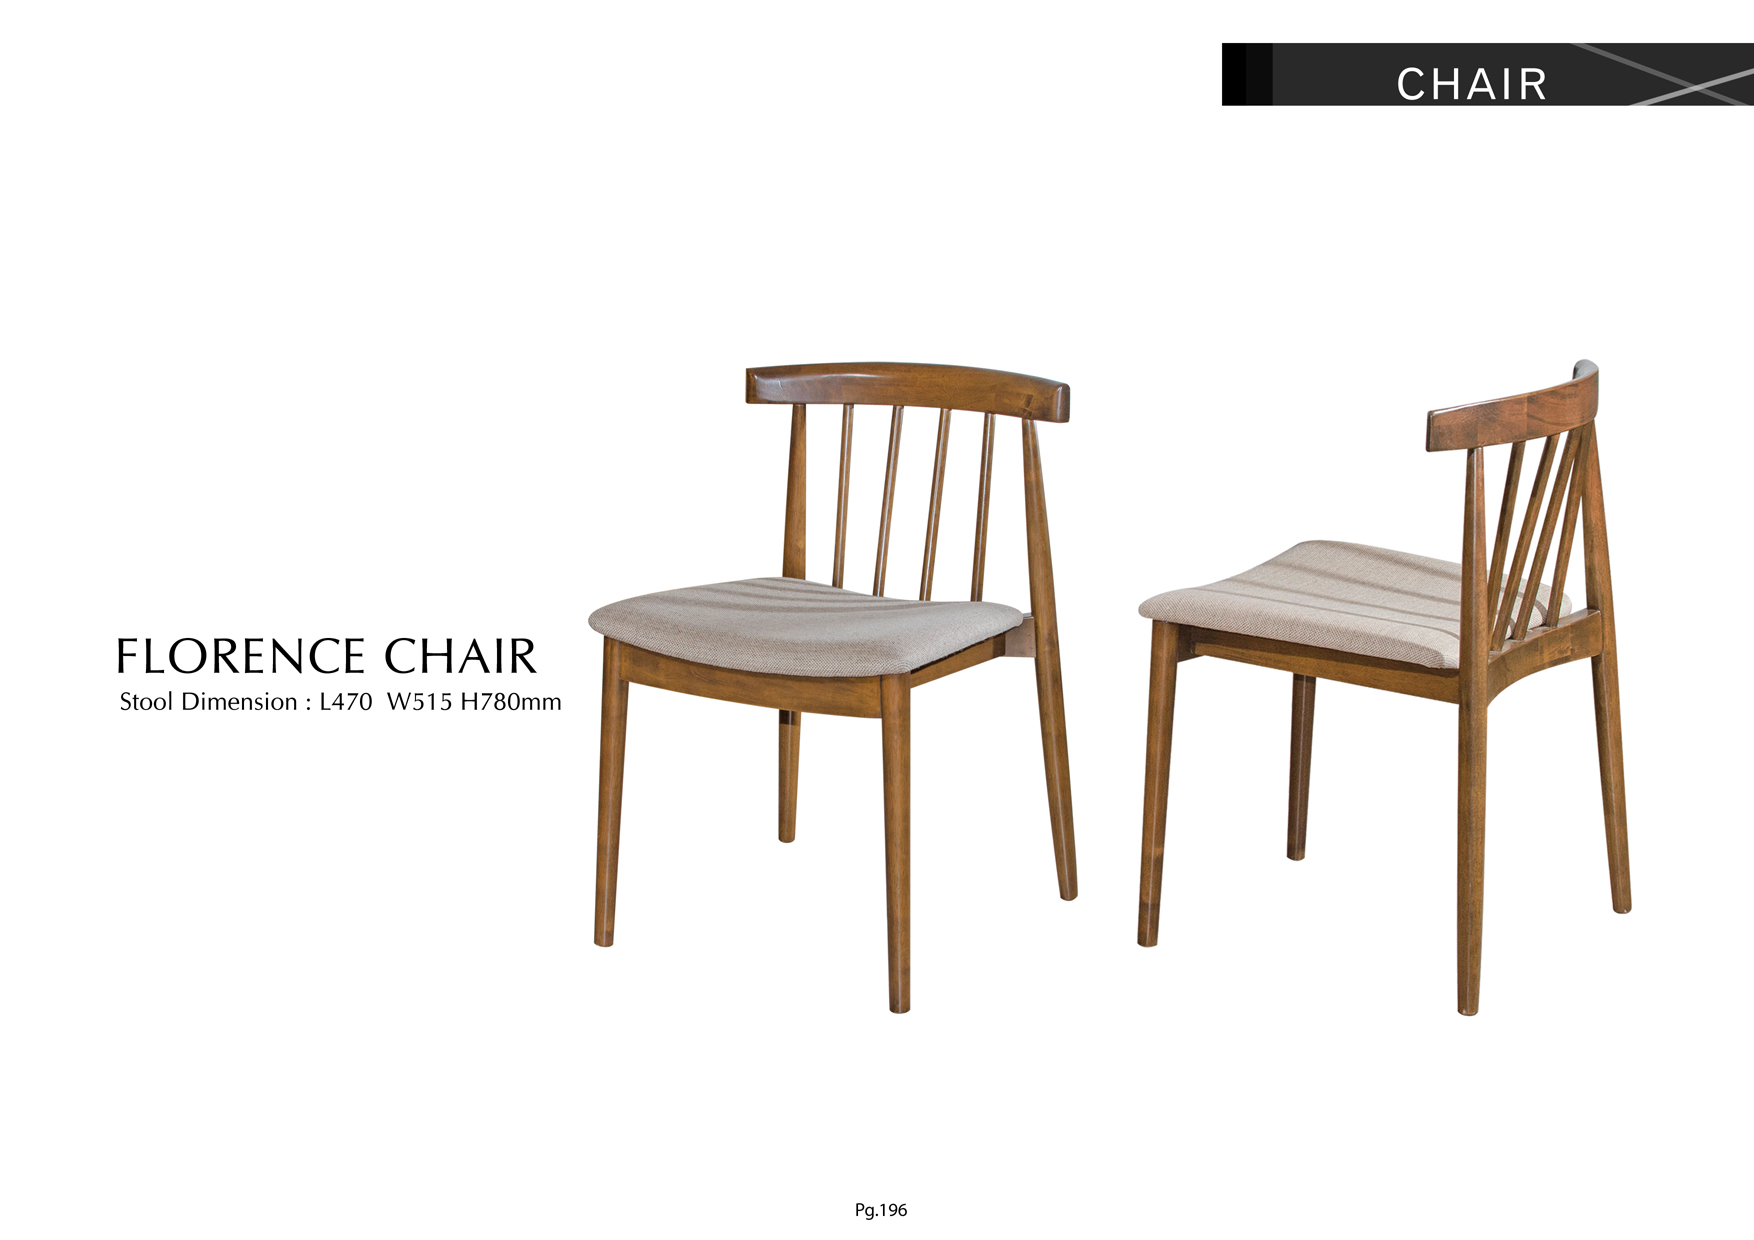 Product: PG196. FLORENCE CHAIR